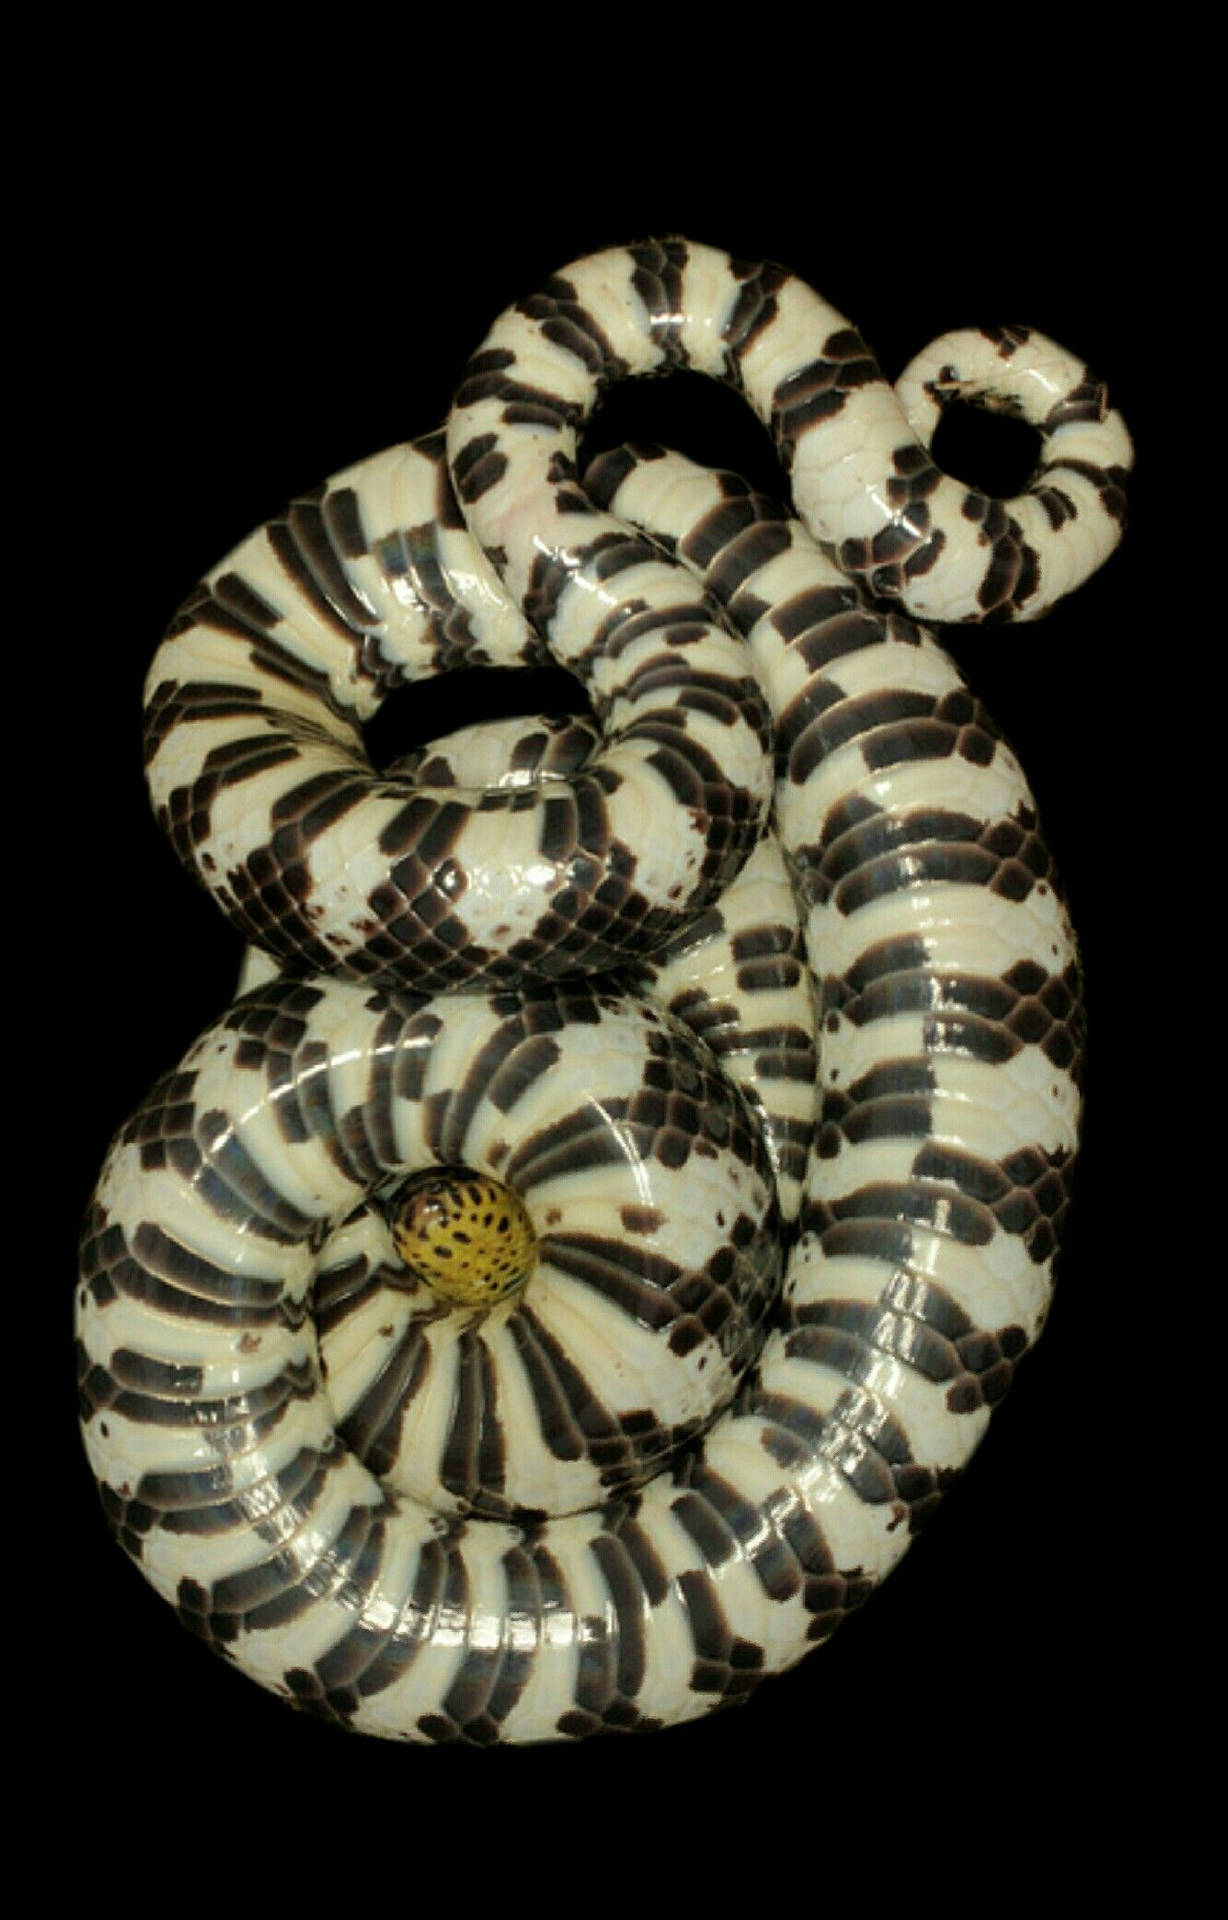 Mud Snake With Black-and-white Pattern Wallpaper